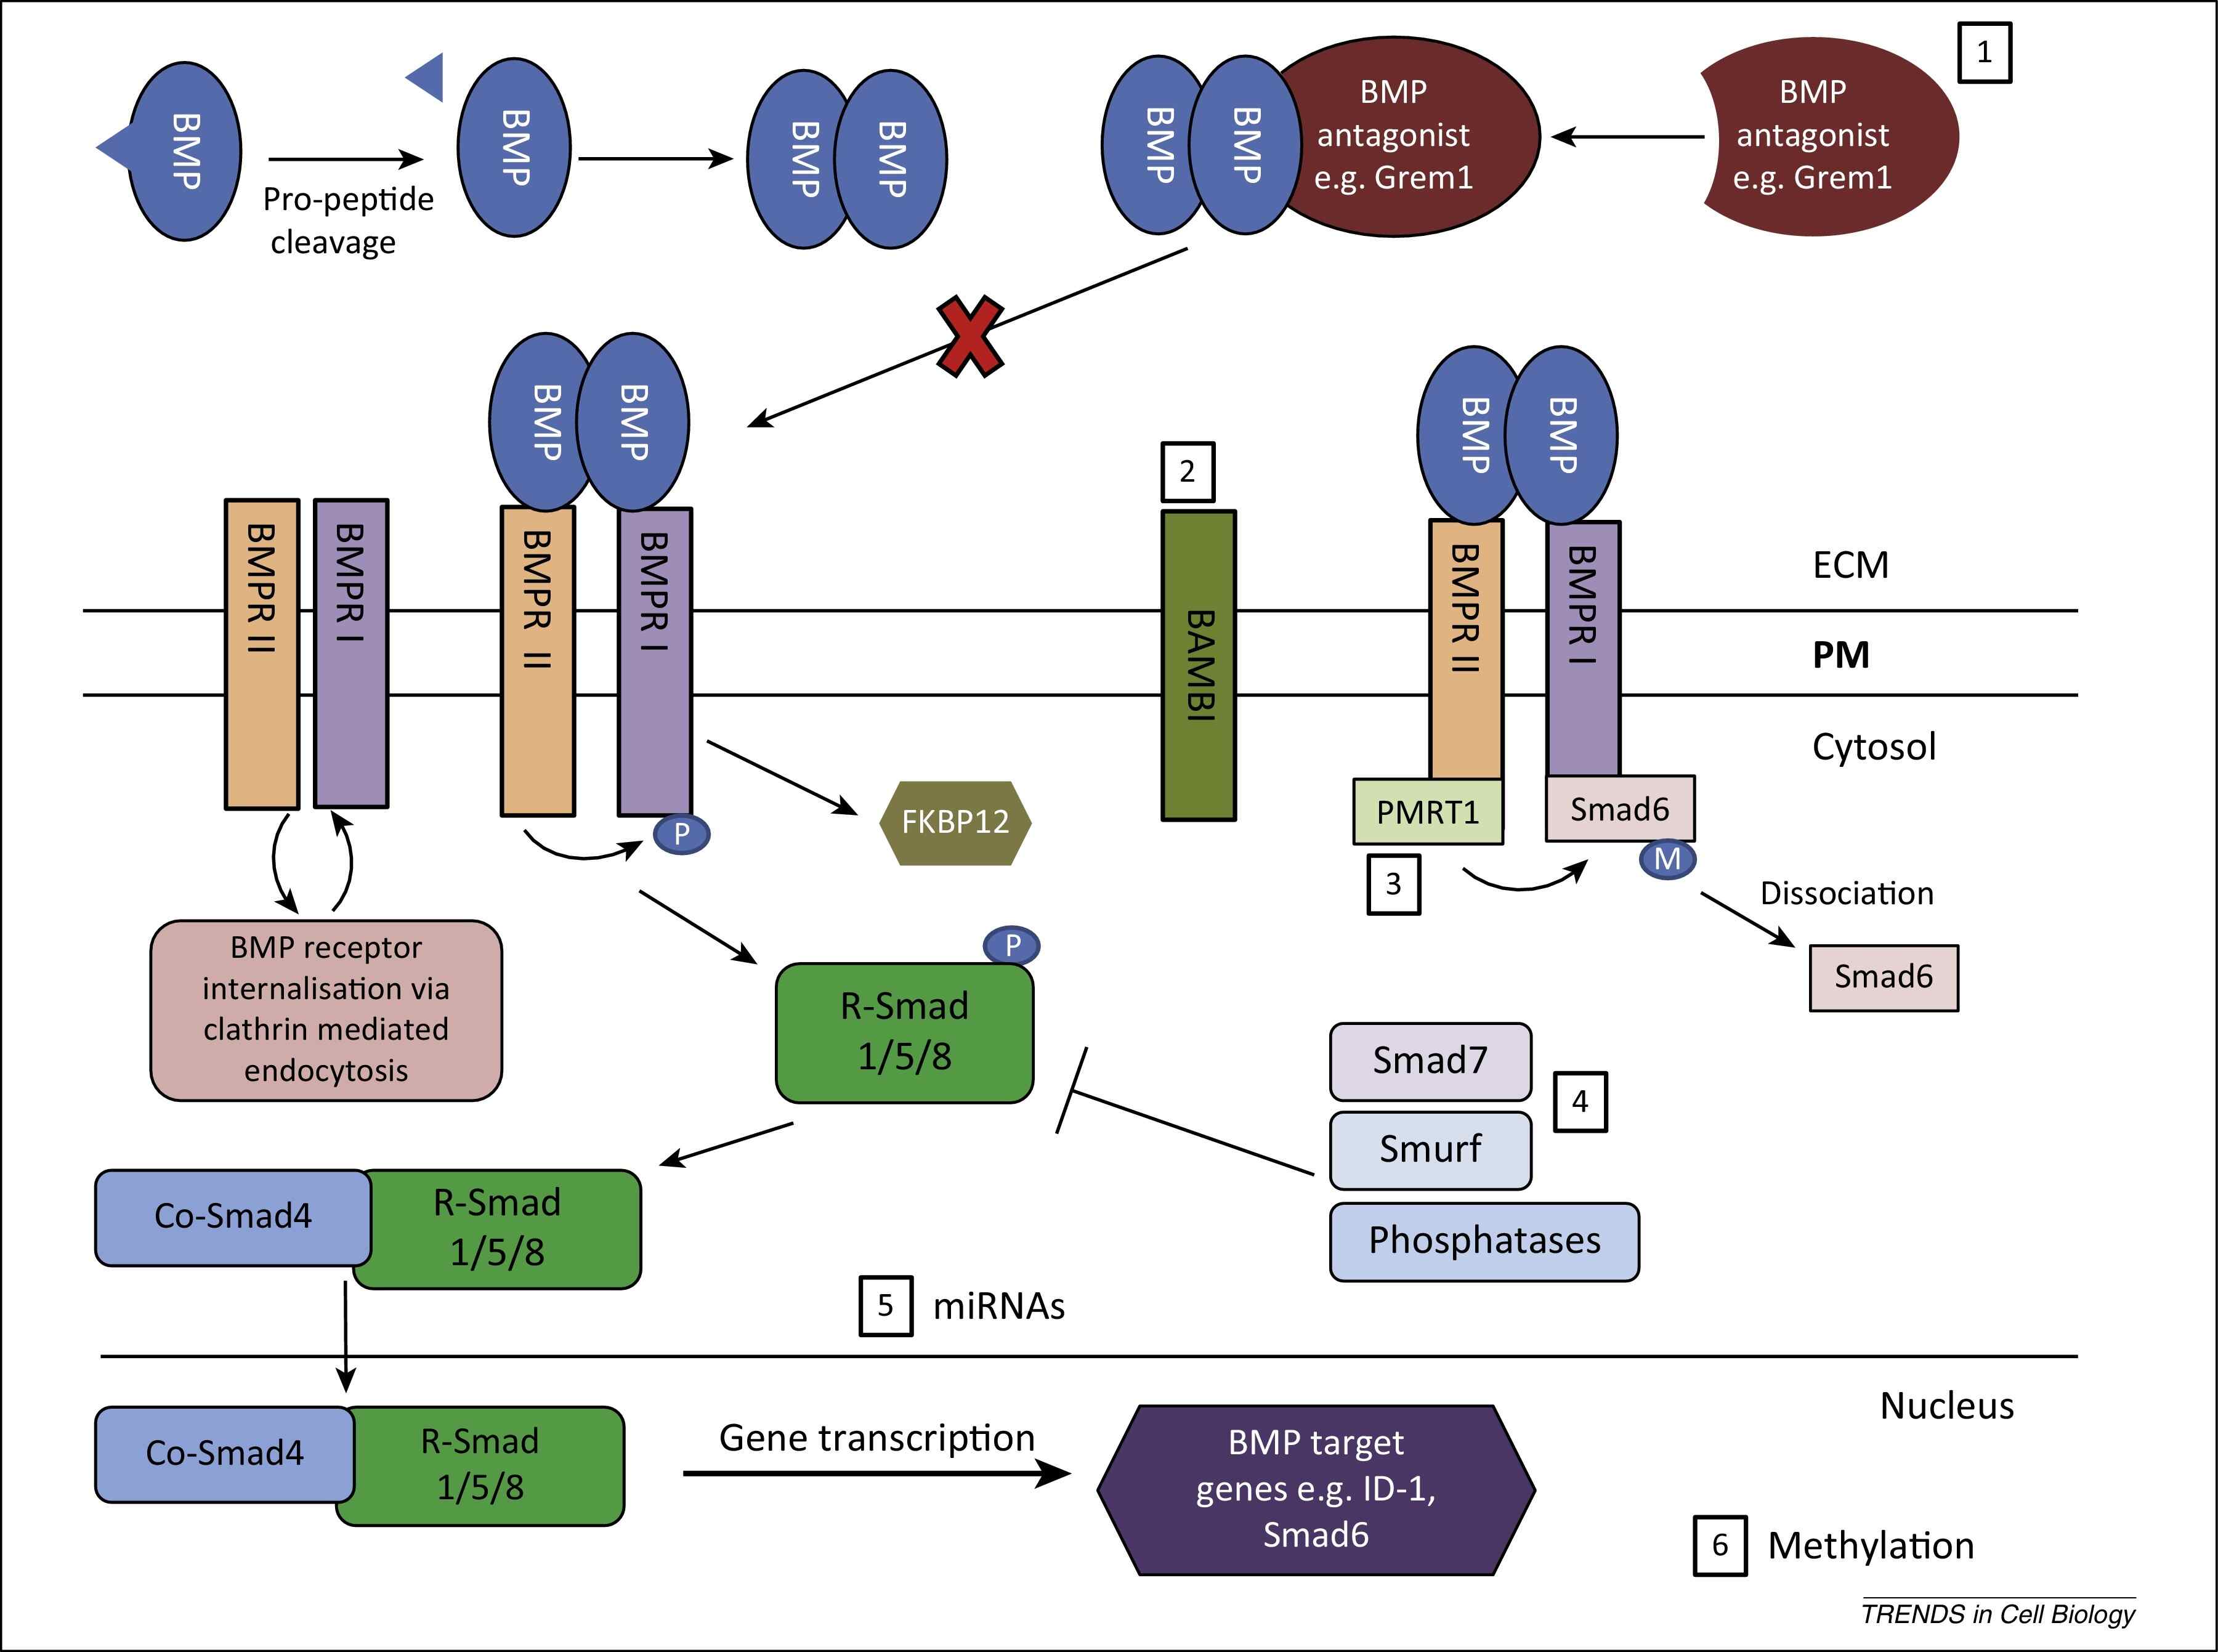 14-astounding-facts-about-bmp-signaling-pathway